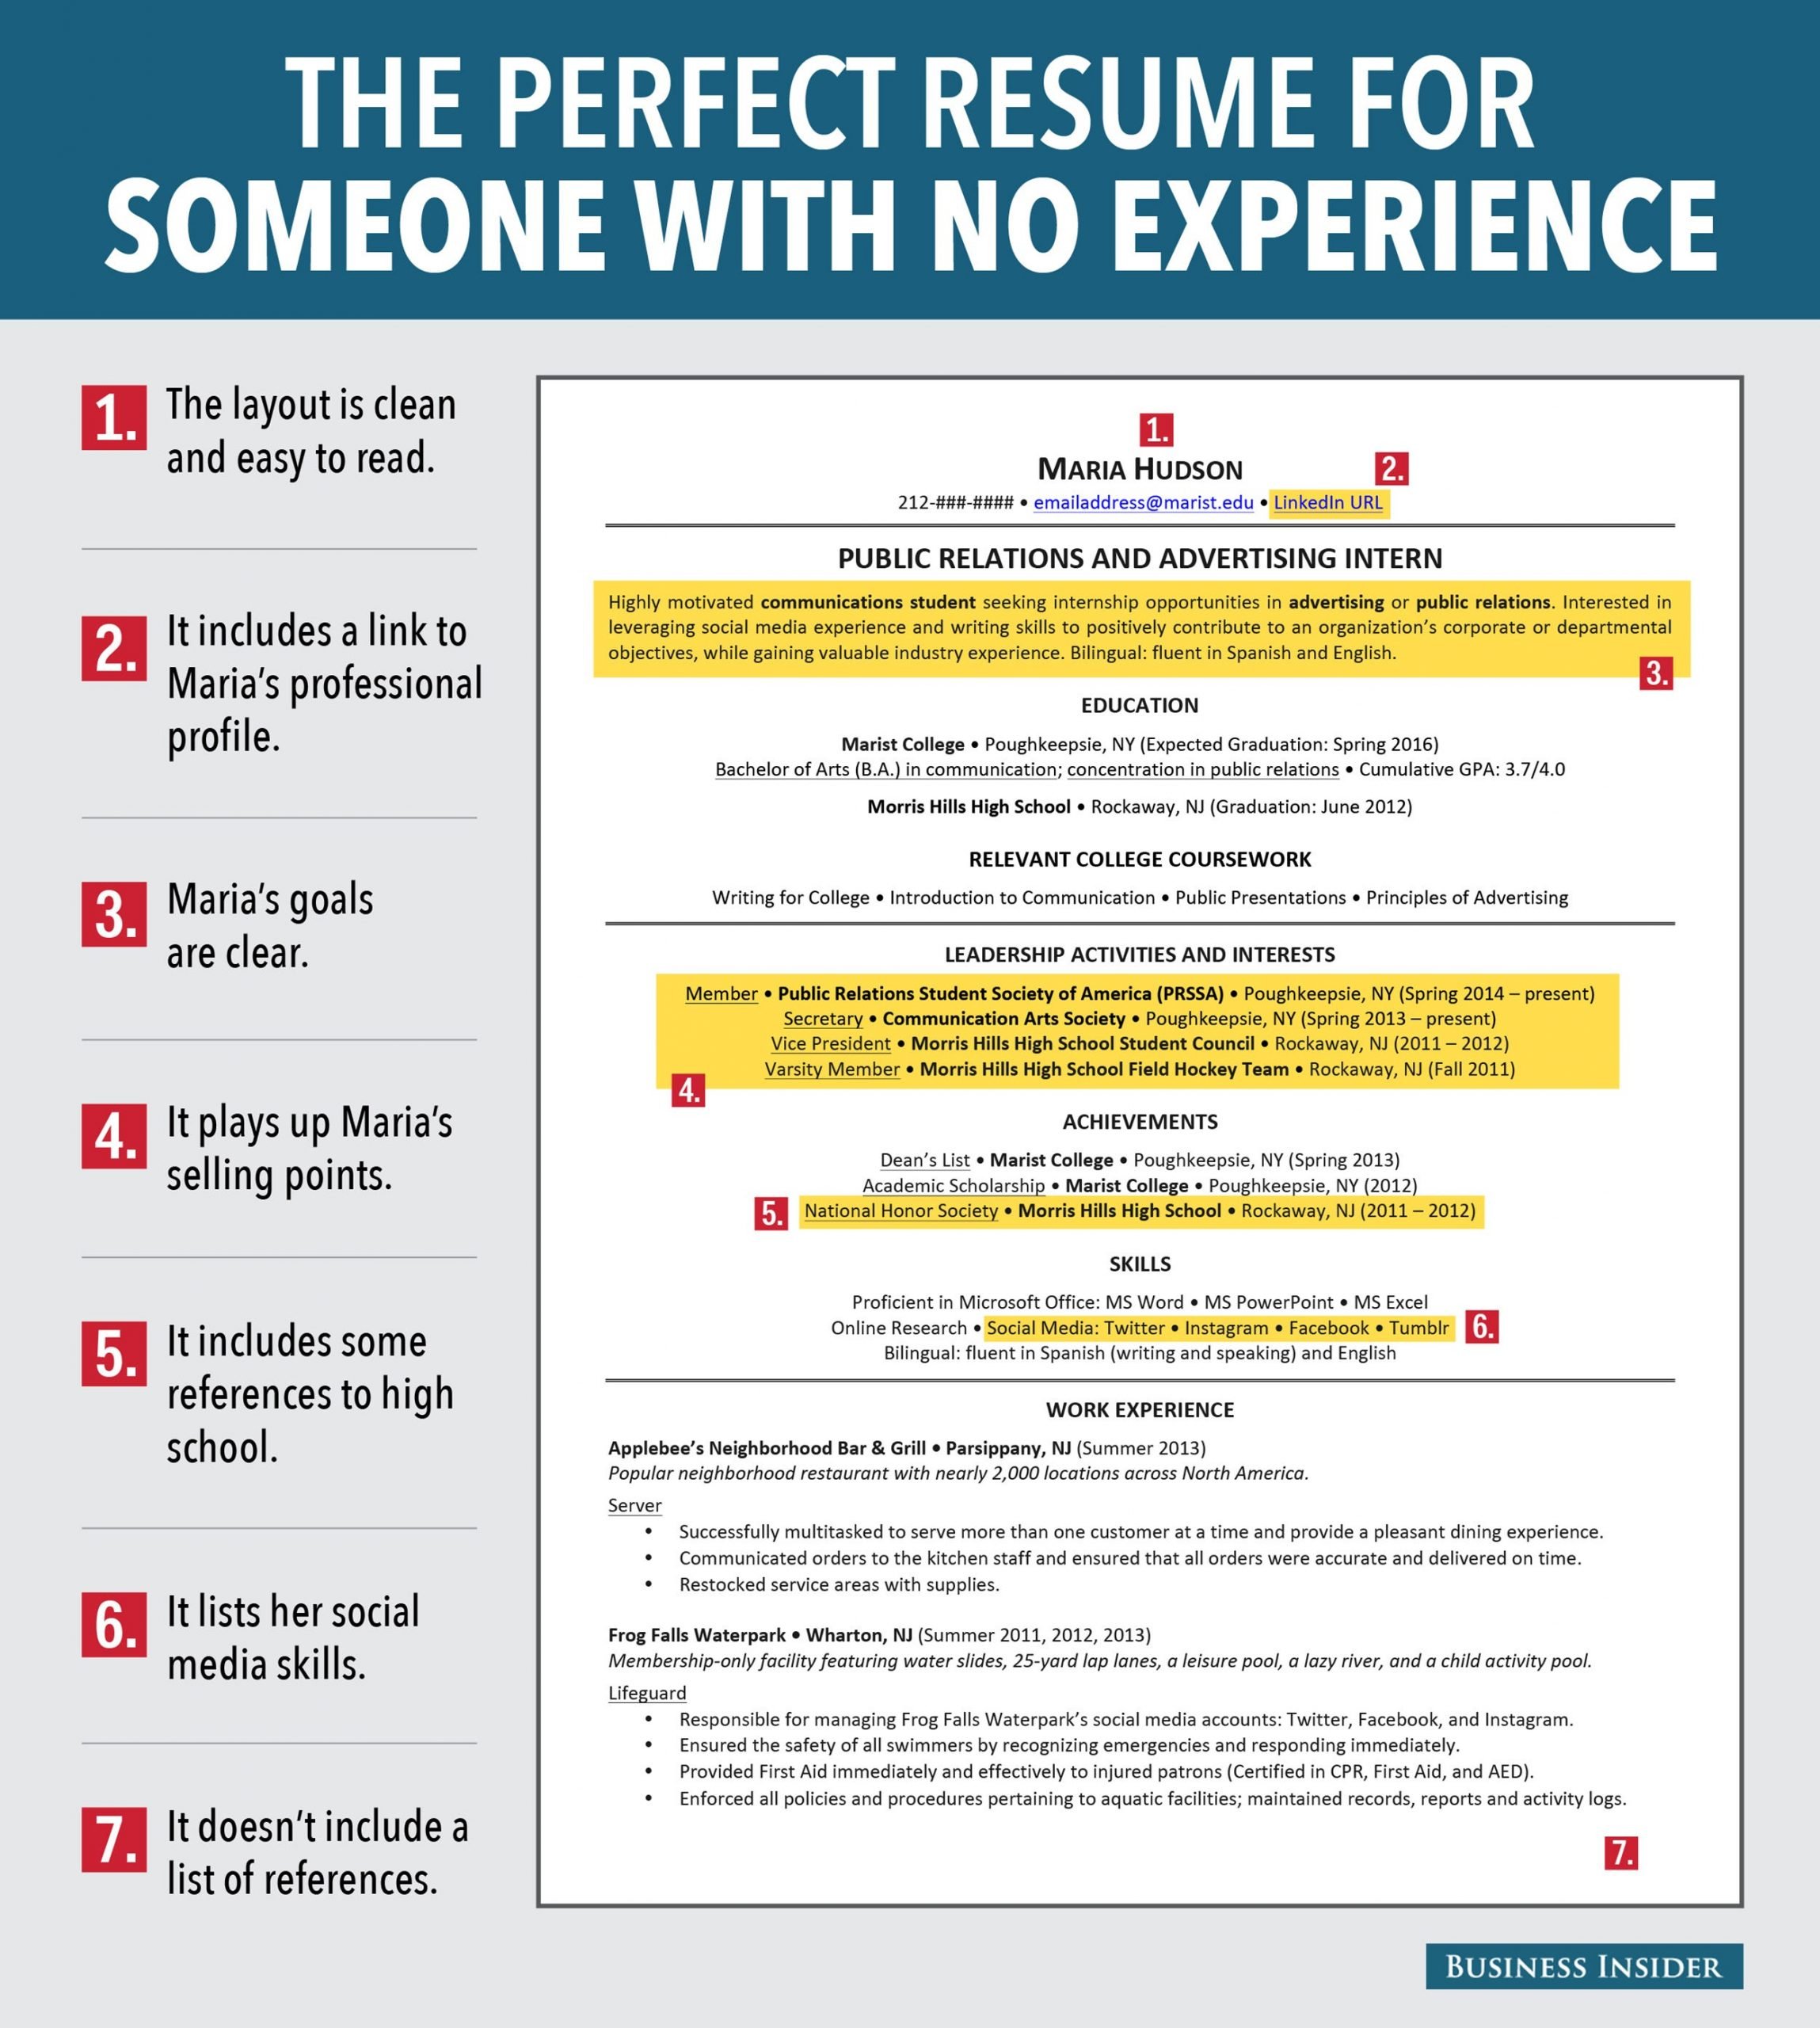 7 reasons this is an excellent resume for someone with no experience ...